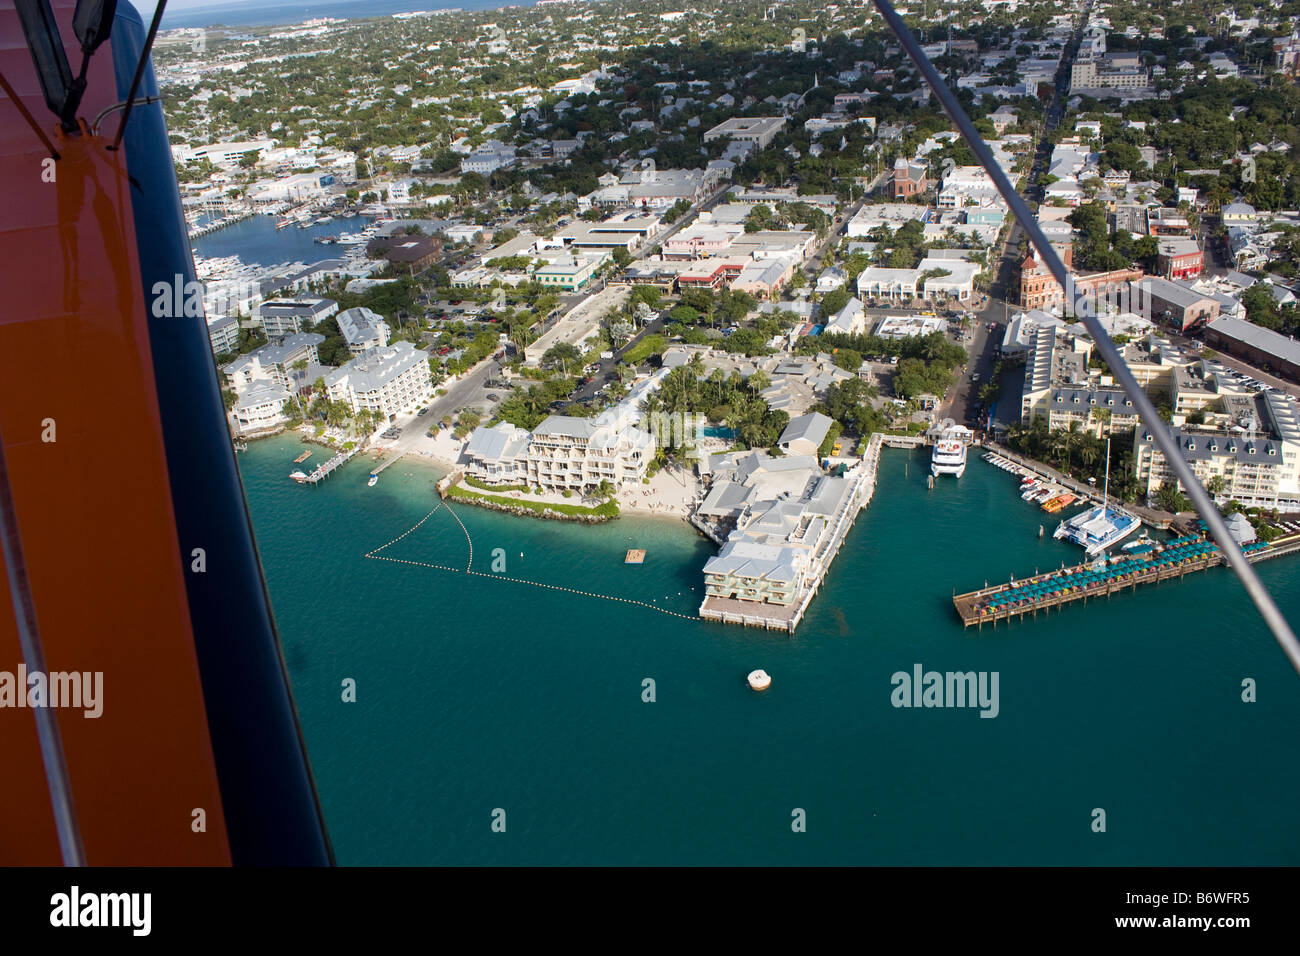 Aerial view of Duval St in Key West Florida looking south from biplane Stock Photo